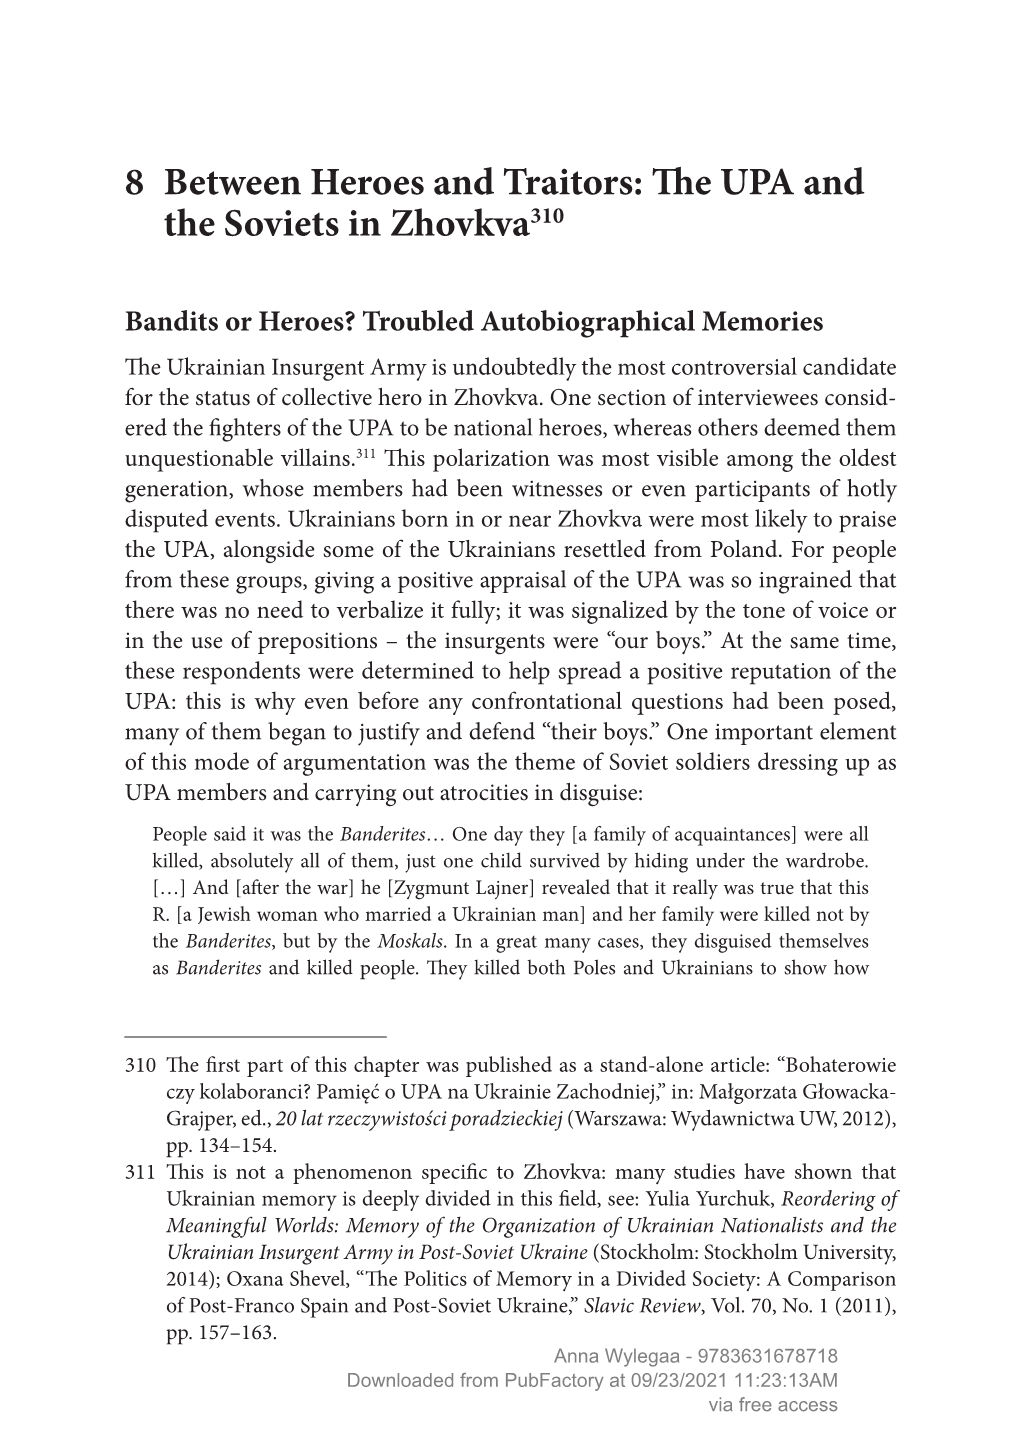 8 Between Heroes and Traitors: the UPA and the Soviets in Zhovkva310